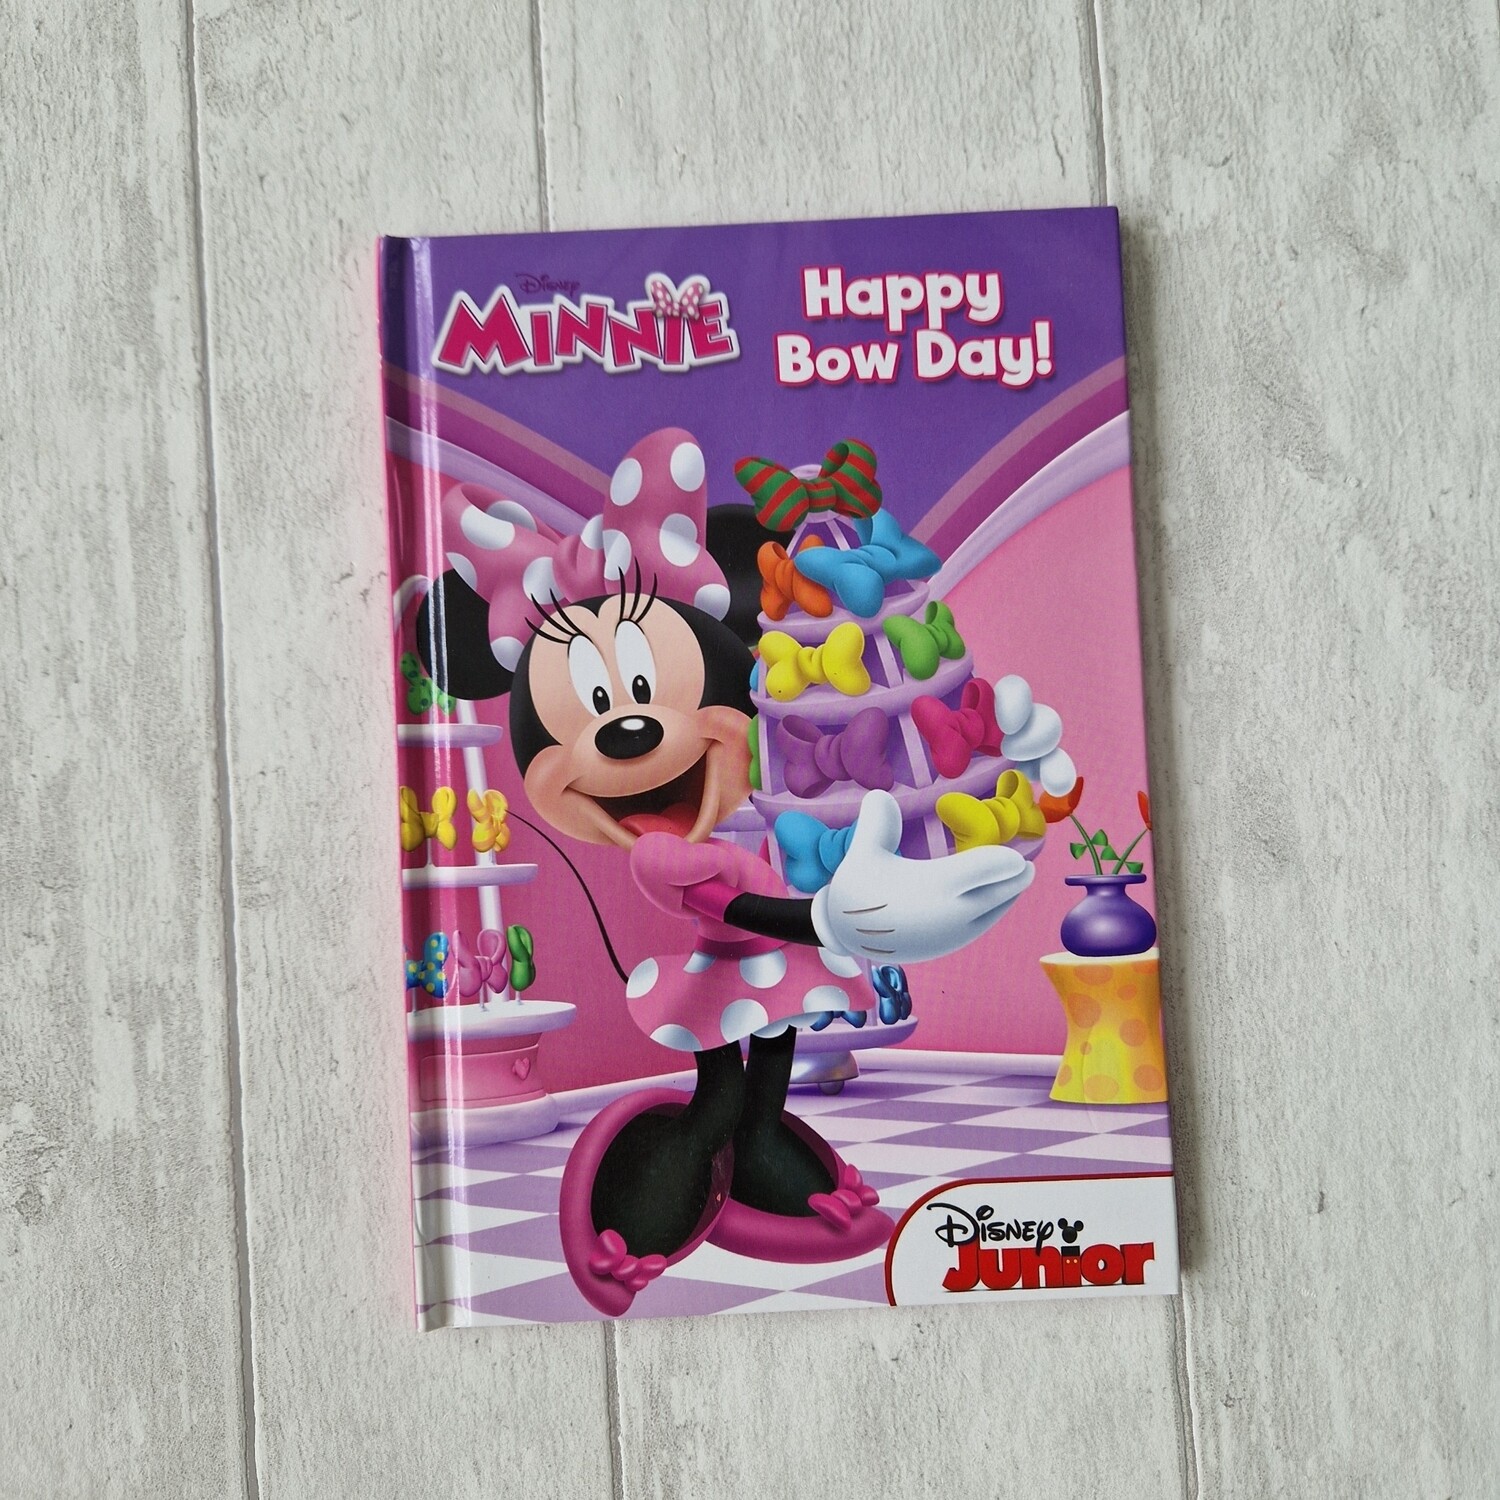 Minnie Mouse, Happy Bow Day